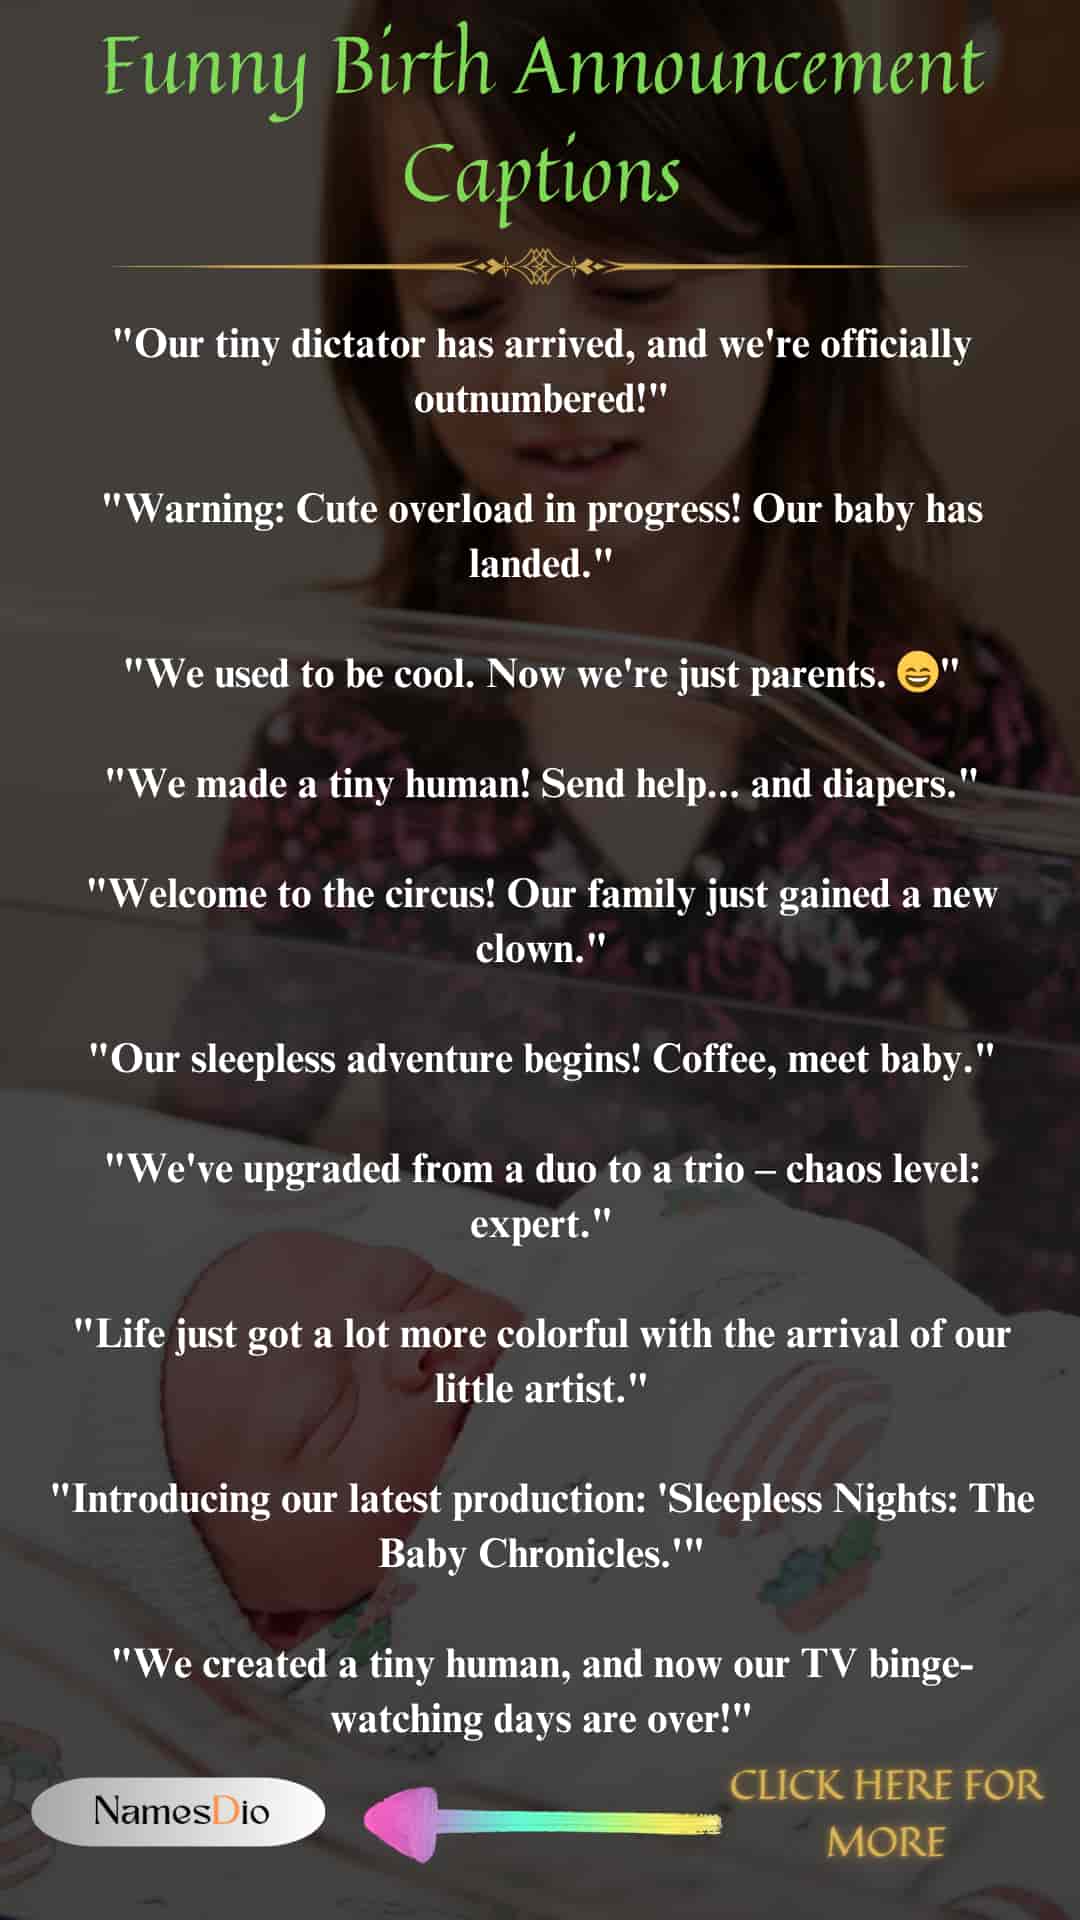 Funny-Birth-Announcement-Captions